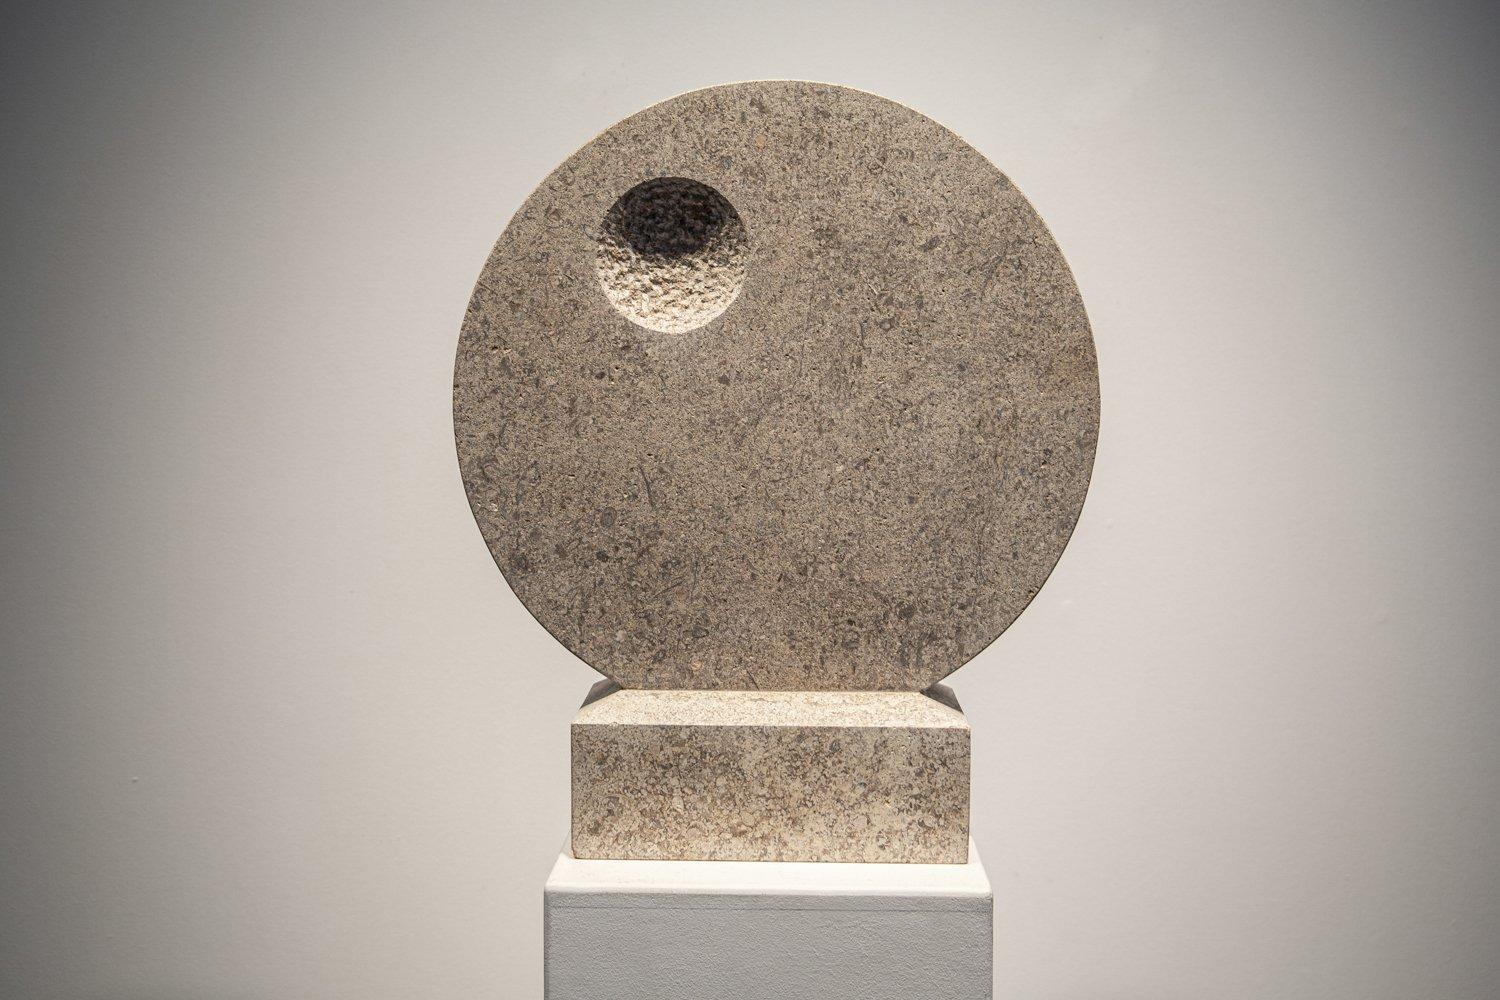 Serene and timeless, a beautiful sculpture sourced from a large private house near Cambridge and most certainly commissioned. The style resonating with post-war sculpture, Hepworth, Moore - ancient in feel with a reduction in form. The scale